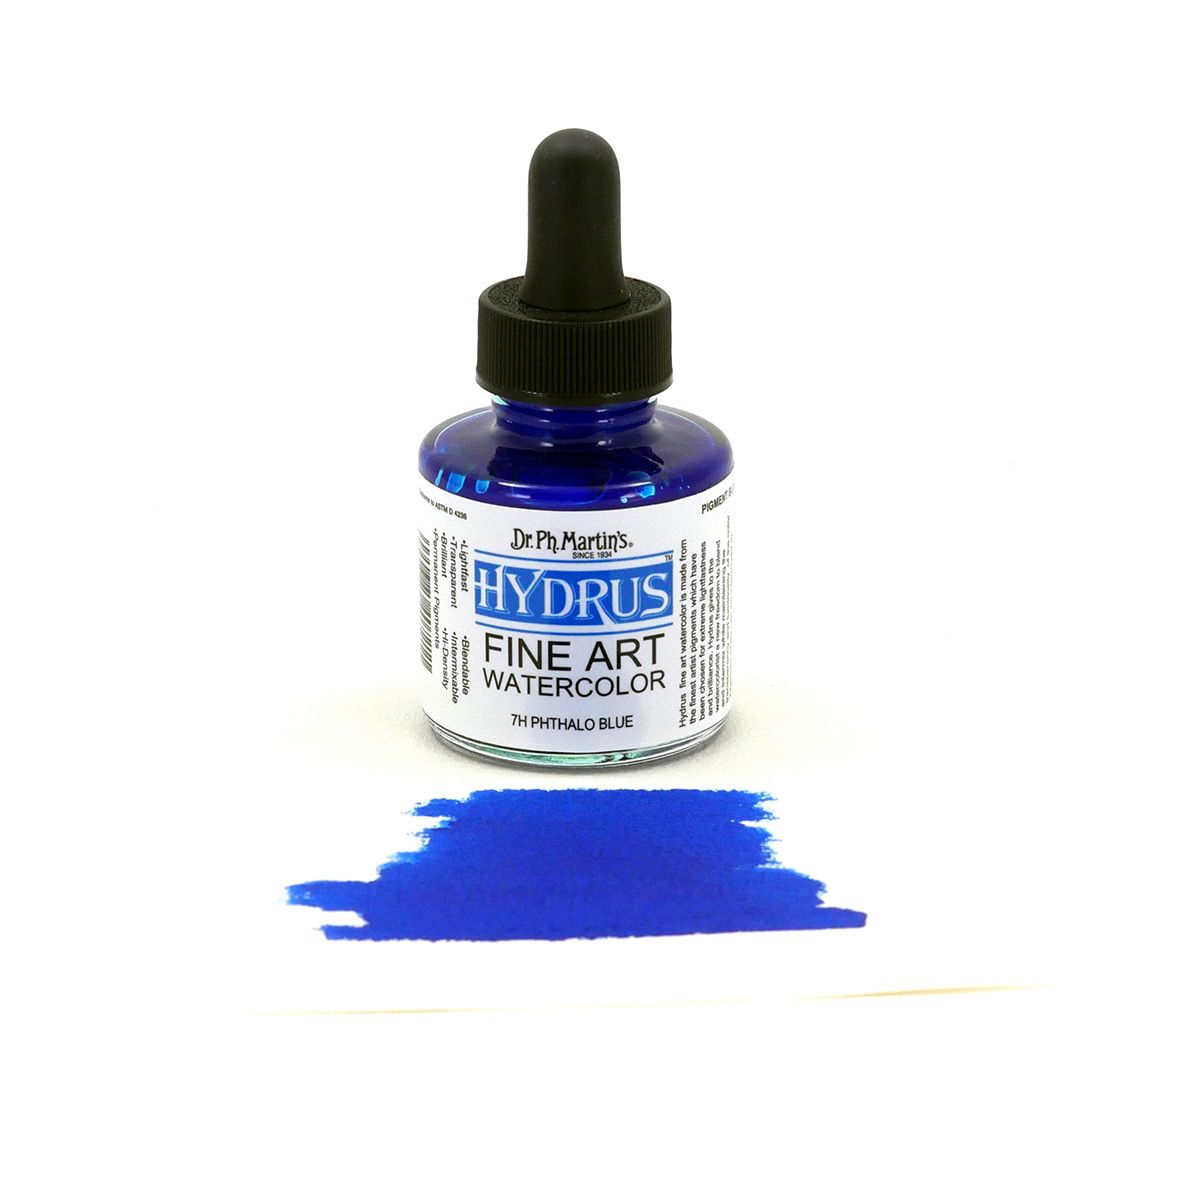 Hydrus Watercolor 1 oz Bottle - Phthalo Blue